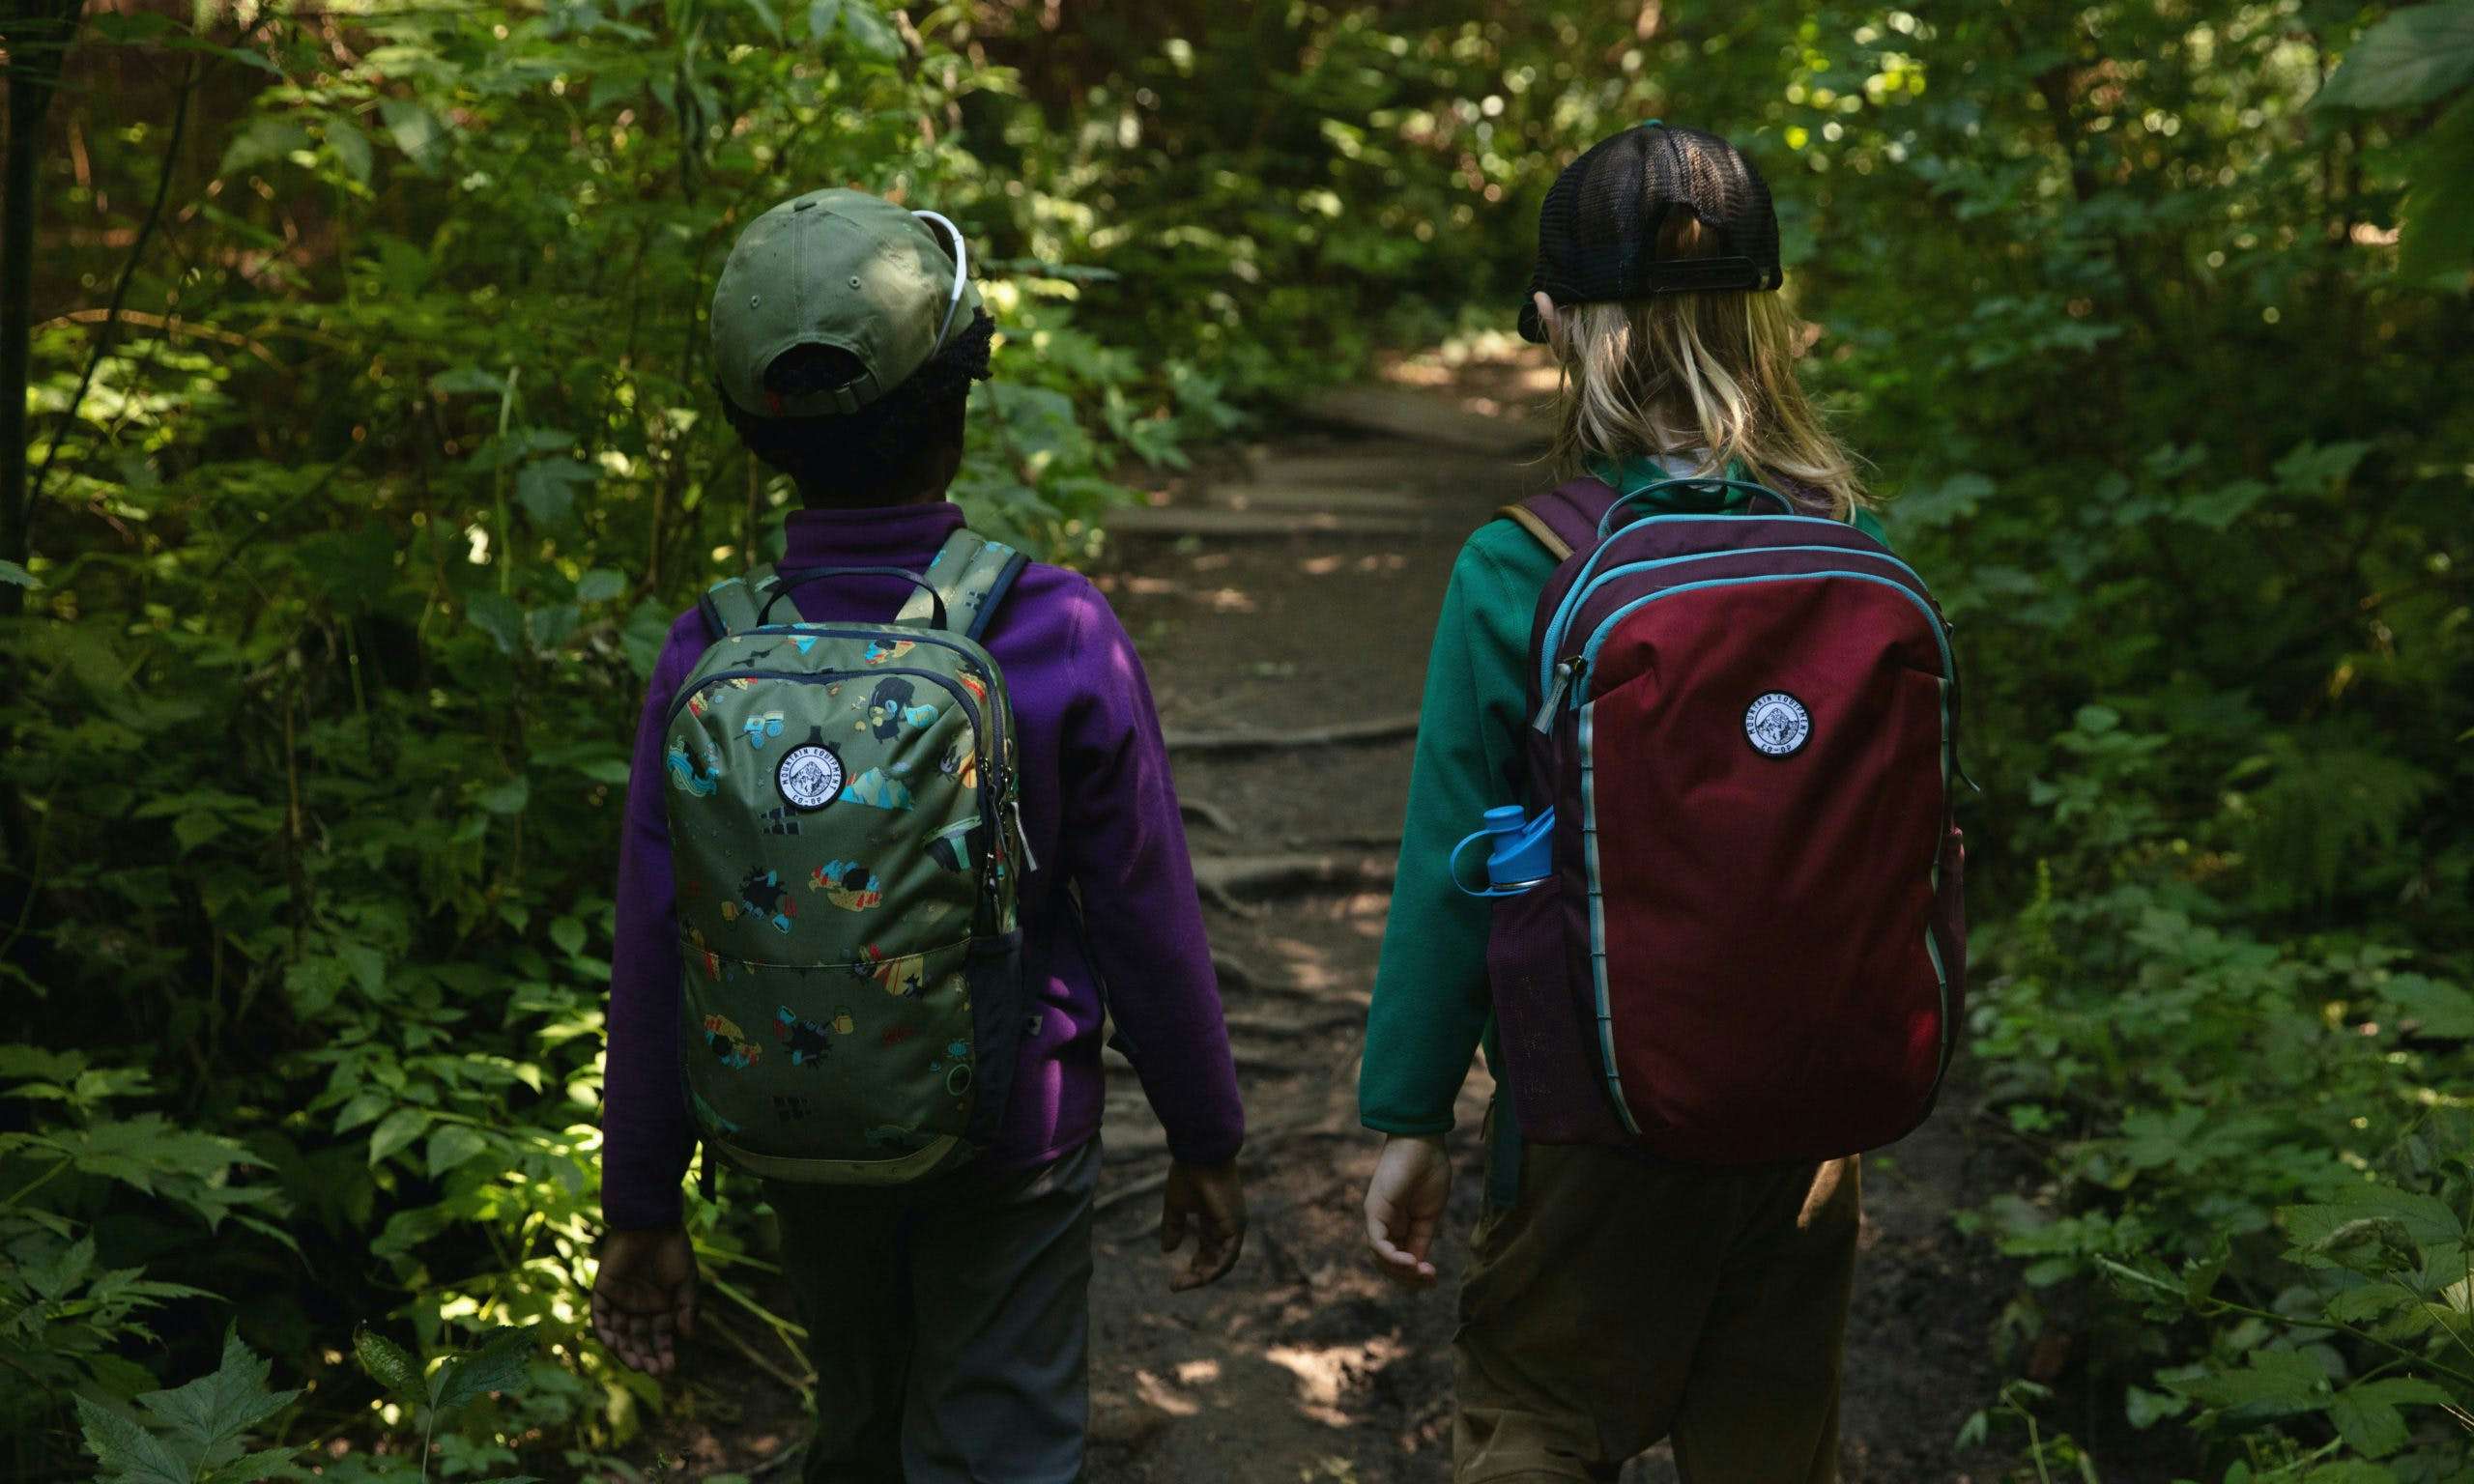 Two kids walking on a forest trail and wearing backpacks